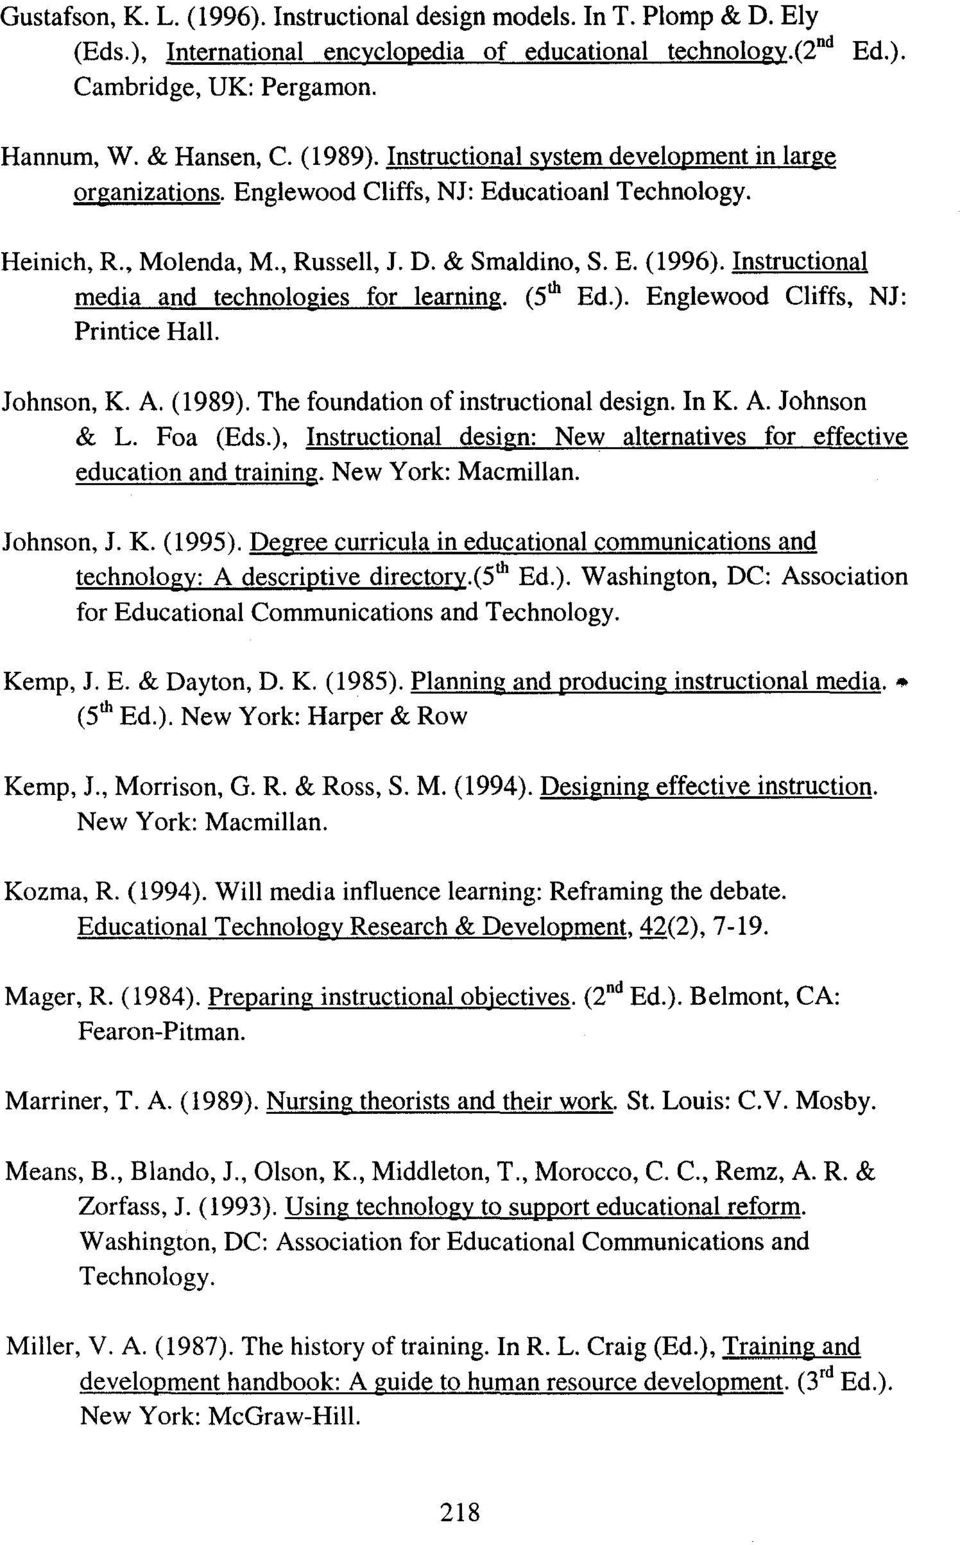 Instructional media and technologies for learning. (5 t1ı Ed.). Englewood Cliffs, NJ: Printice Hall. Johnson, K. A. (1989). The foundation of instructional design. In K. A. Johnson & L. Foa (Eds.